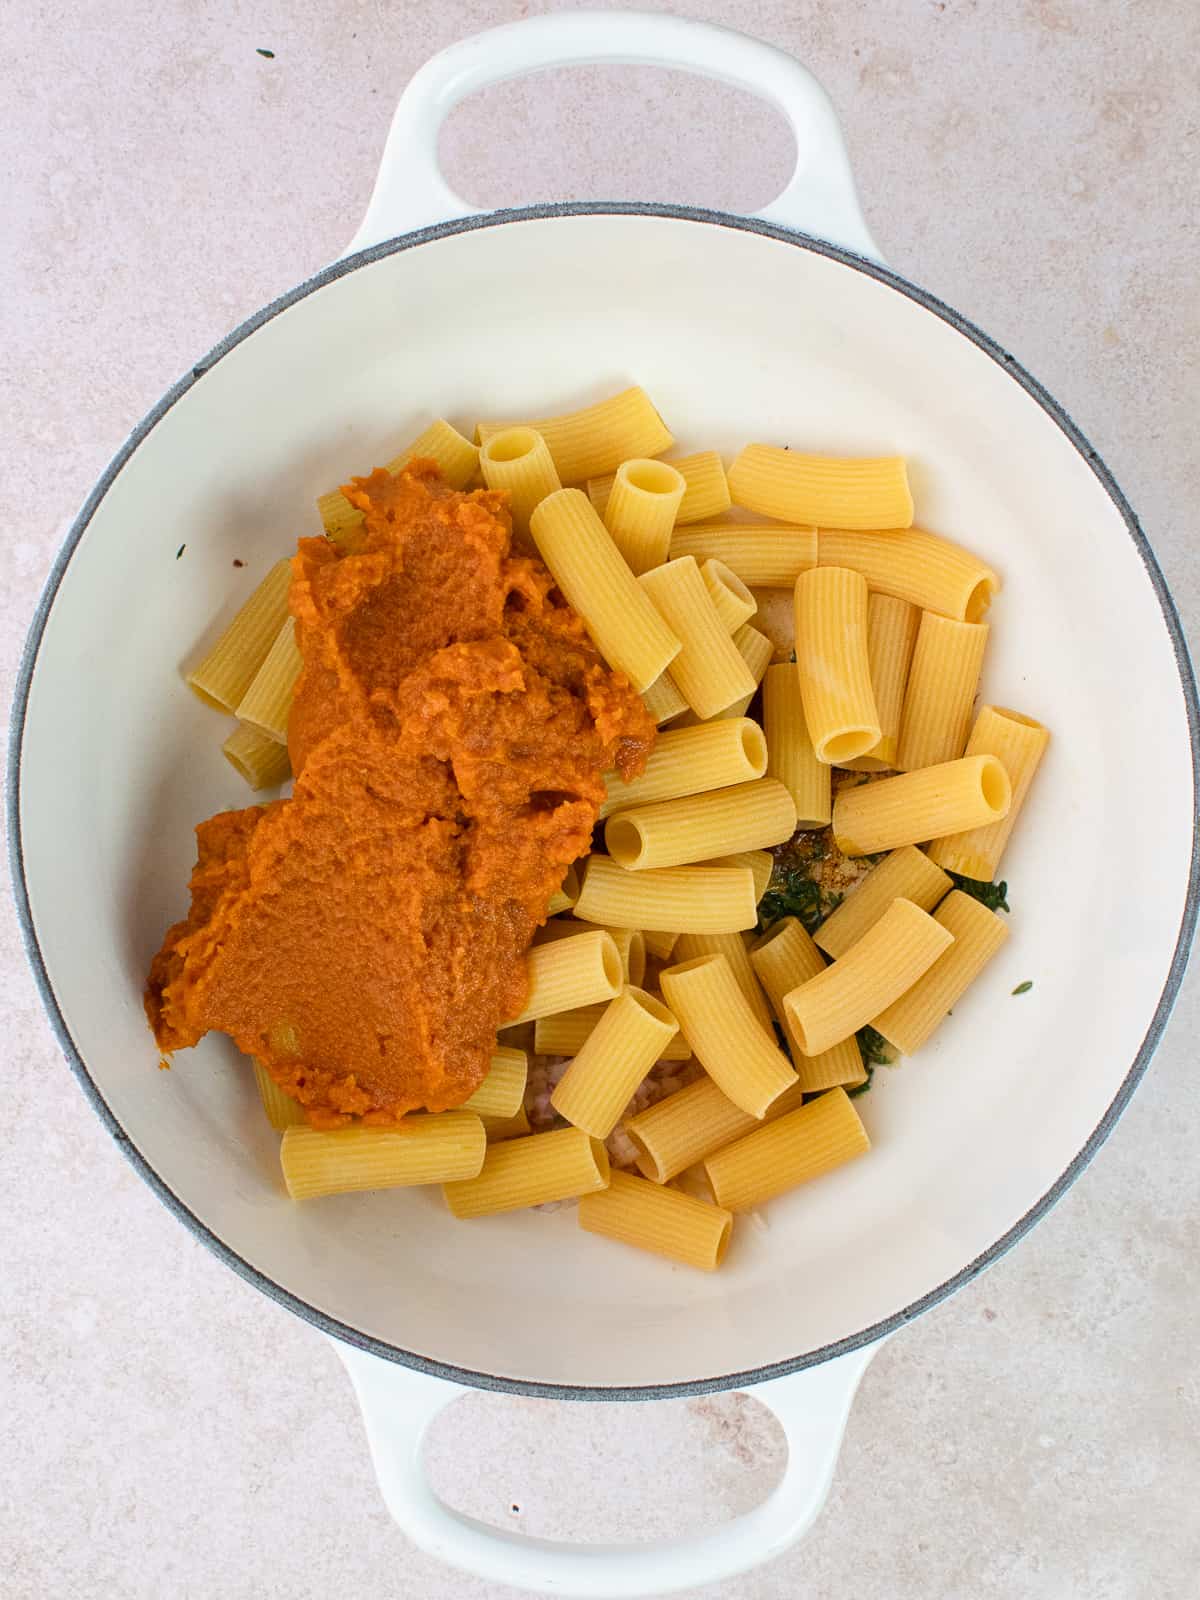 Pumpkin puree and raw rigatoni are added to pot